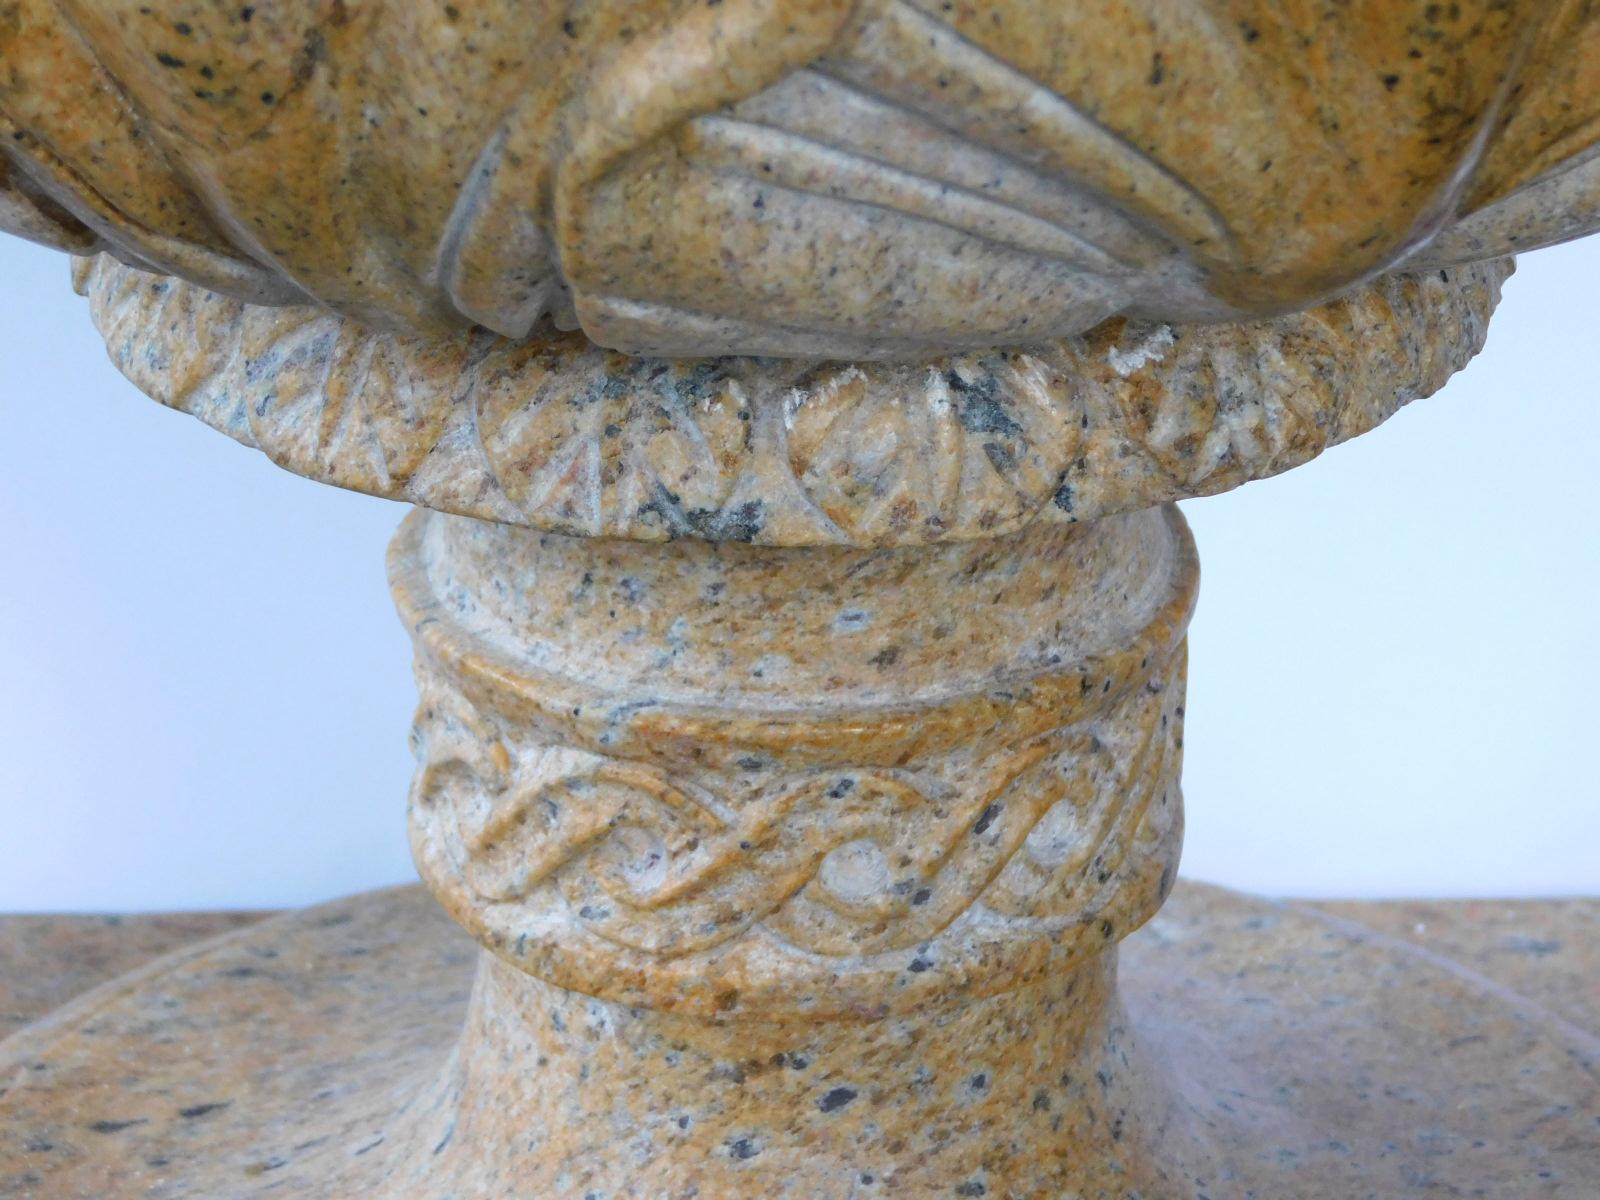 Each well-carved finial in an ochre-colored well-mottled granite, resting on separate bases.